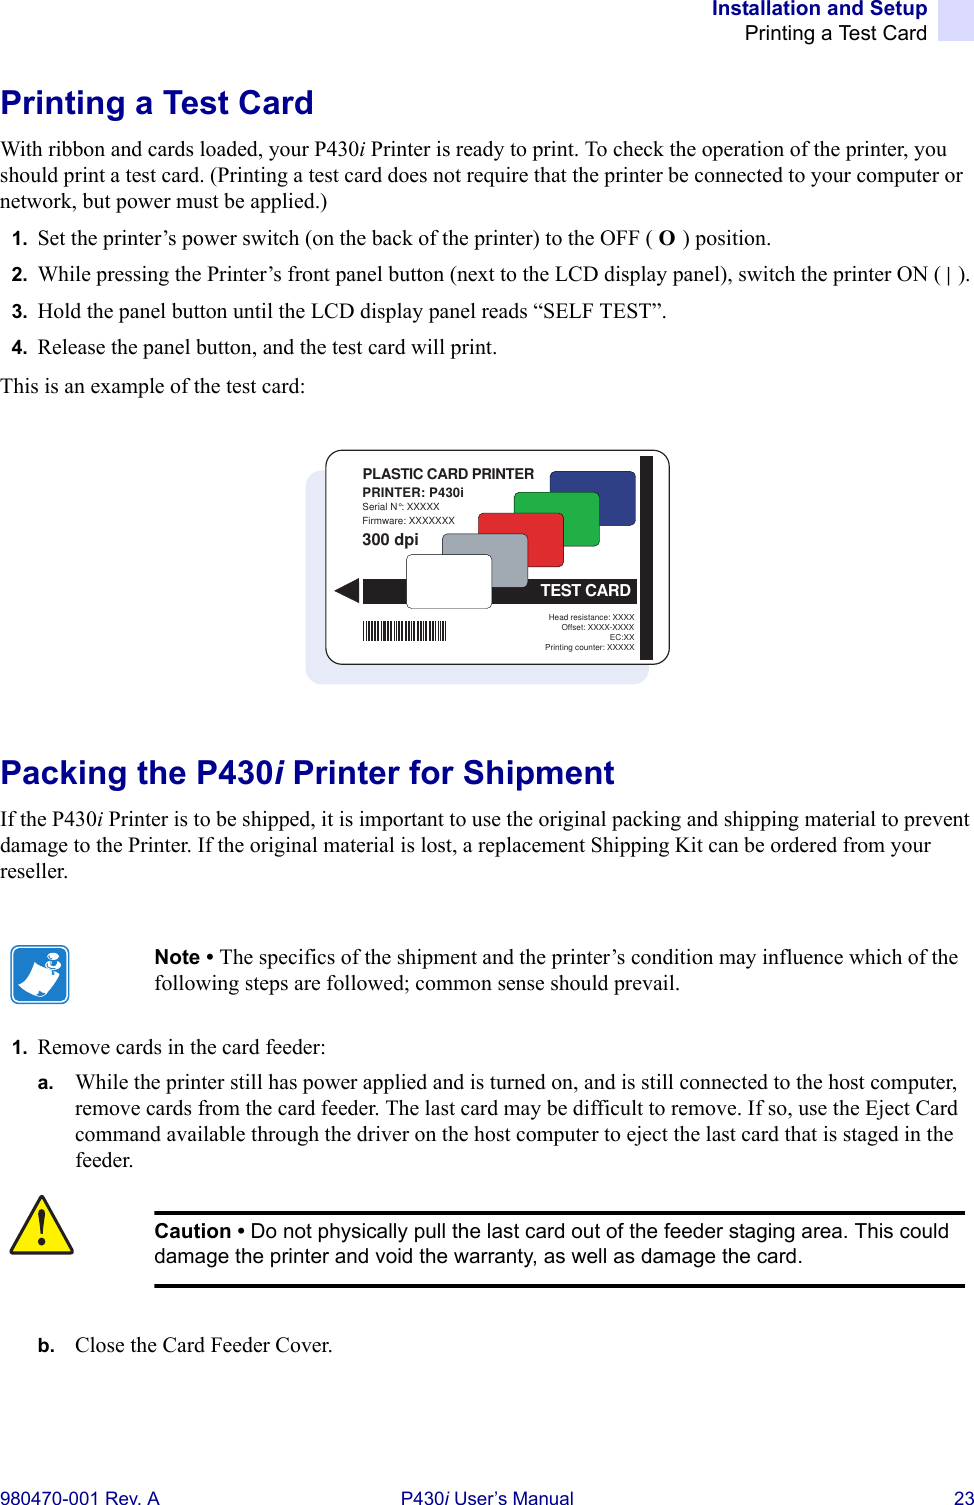 Installation and SetupPrinting a Test Card980470-001 Rev. A P430i User’s Manual 23Printing a Test CardWith ribbon and cards loaded, your P430i Printer is ready to print. To check the operation of the printer, you should print a test card. (Printing a test card does not require that the printer be connected to your computer or network, but power must be applied.)1. Set the printer’s power switch (on the back of the printer) to the OFF ( O ) position.2. While pressing the Printer’s front panel button (next to the LCD display panel), switch the printer ON ( | ).3. Hold the panel button until the LCD display panel reads “SELF TEST”.4. Release the panel button, and the test card will print.This is an example of the test card:Packing the P430i Printer for ShipmentIf the P430i Printer is to be shipped, it is important to use the original packing and shipping material to prevent damage to the Printer. If the original material is lost, a replacement Shipping Kit can be ordered from your reseller.1. Remove cards in the card feeder:a. While the printer still has power applied and is turned on, and is still connected to the host computer, remove cards from the card feeder. The last card may be difficult to remove. If so, use the Eject Card command available through the driver on the host computer to eject the last card that is staged in the feeder.b. Close the Card Feeder Cover.Note • The specifics of the shipment and the printer’s condition may influence which of the following steps are followed; common sense should prevail.Caution • Do not physically pull the last card out of the feeder staging area. This could damage the printer and void the warranty, as well as damage the card.PRINTER: P430iSerial N°: XXXXXFirmware: XXXXXXXHead resistance: XXXXOffset: XXXX-XXXXEC:XXPrinting counter: XXXXX300 dpiPLASTIC CARD PRINTERTEST CARD